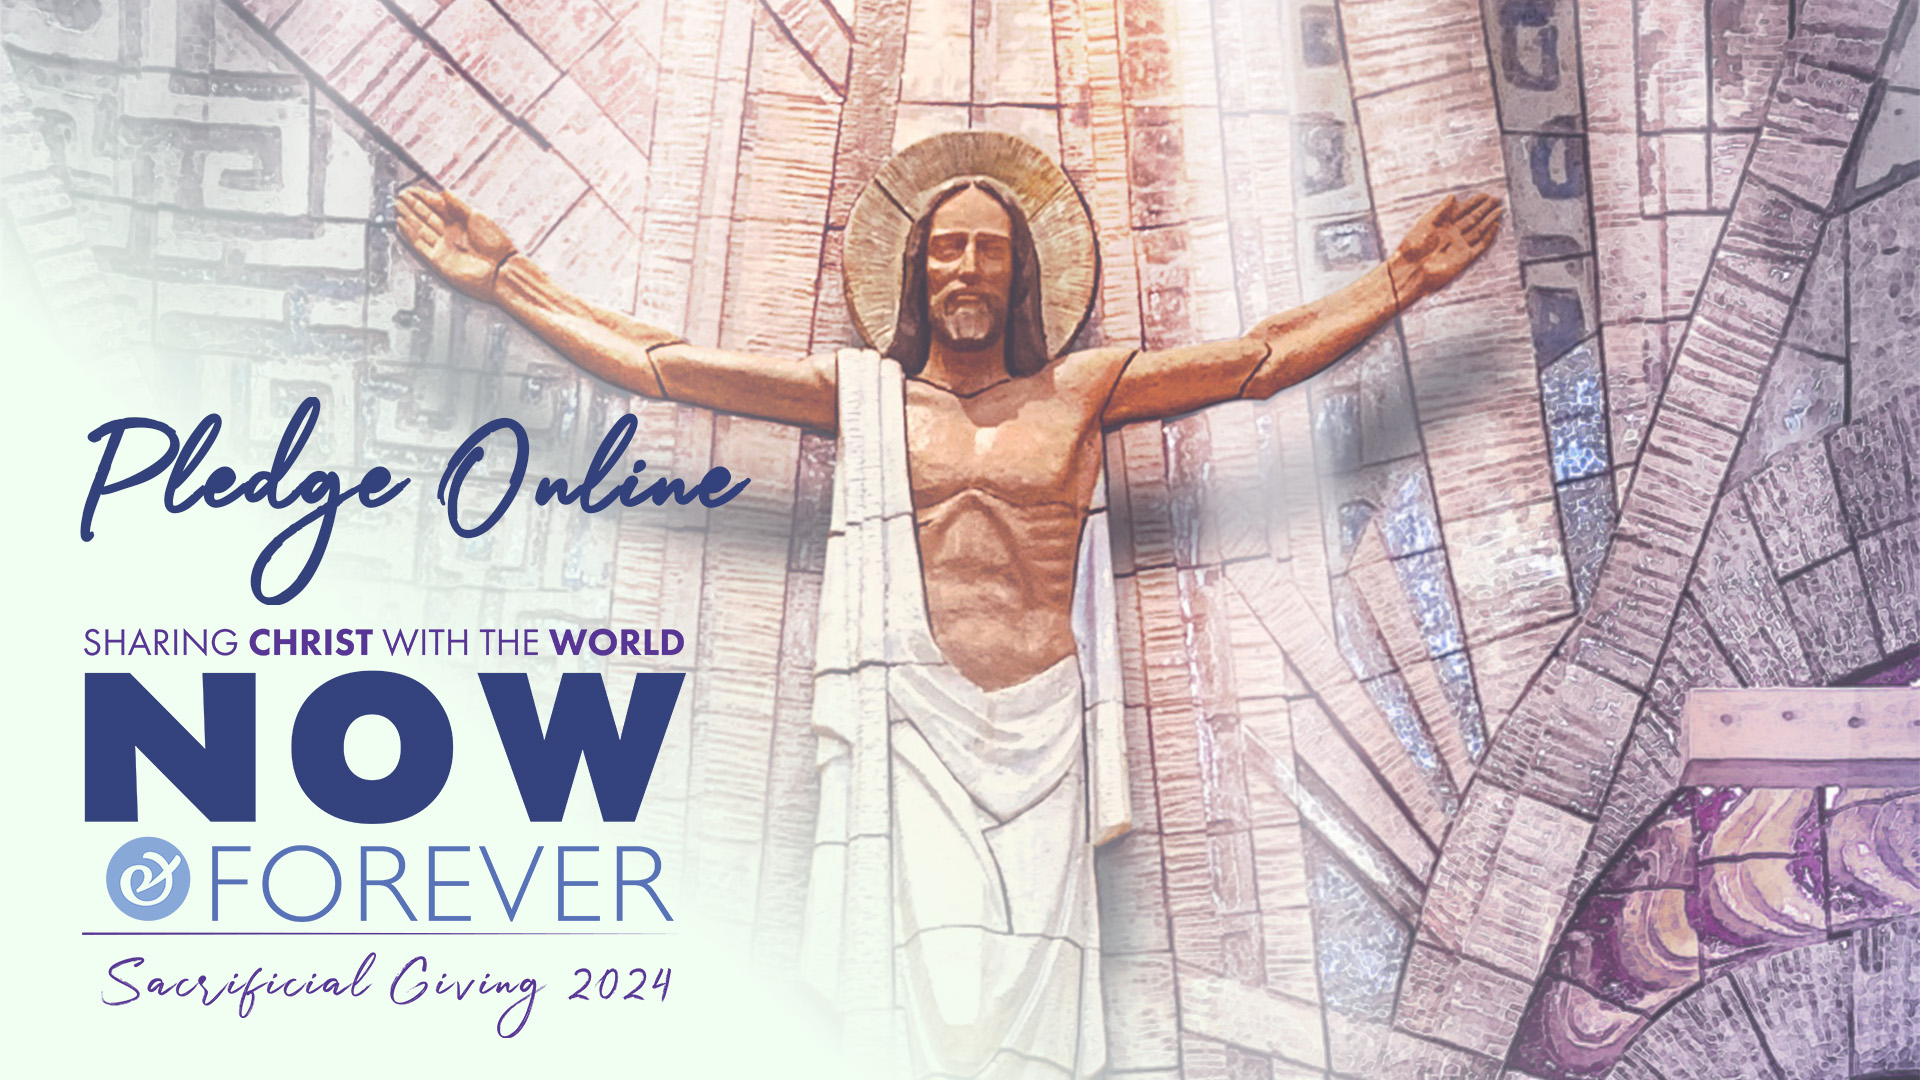 Pledge online to St Mary Magdalen